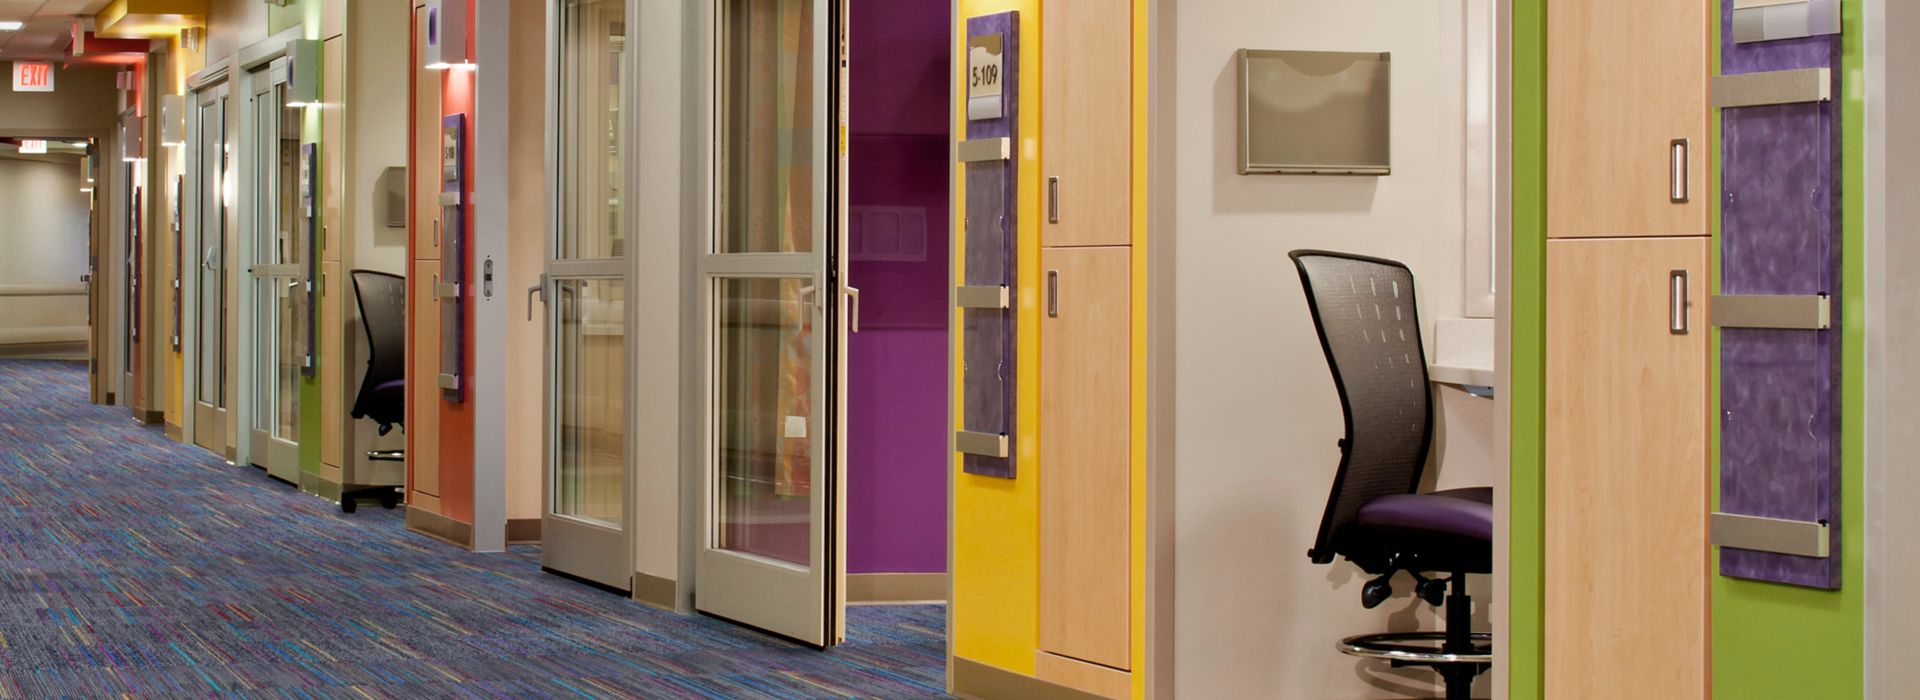 Interface Roy G Biv carpet tile in healthcare corridor with multiple rooms